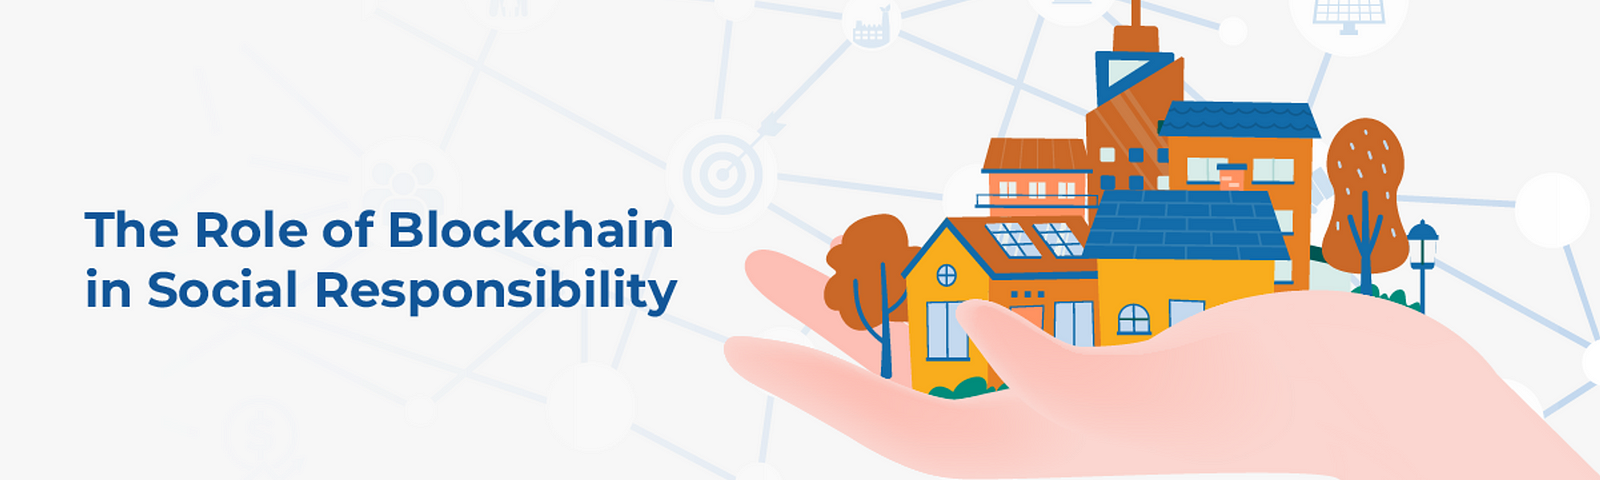 The Role of Blockchain in Social Responsibility